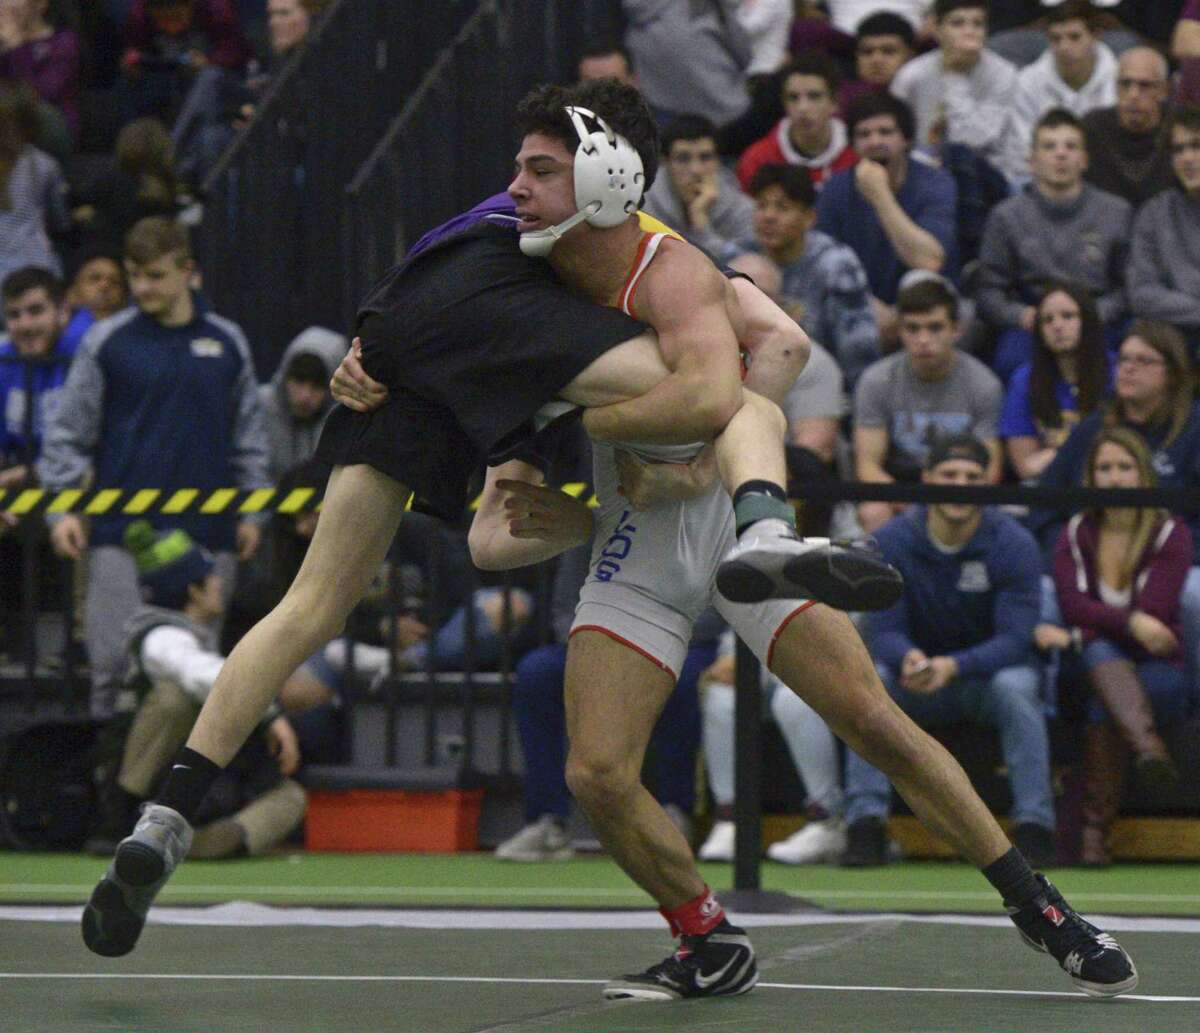 Westhill's Chase Parrot and Danbury's Kyle Fields wrestle in the finals for the 132-pound weight class in the Connecticut State Open championships, Saturday, February 23, 2019, at the Floyd Little Athletic Center, New Haven, Conn.